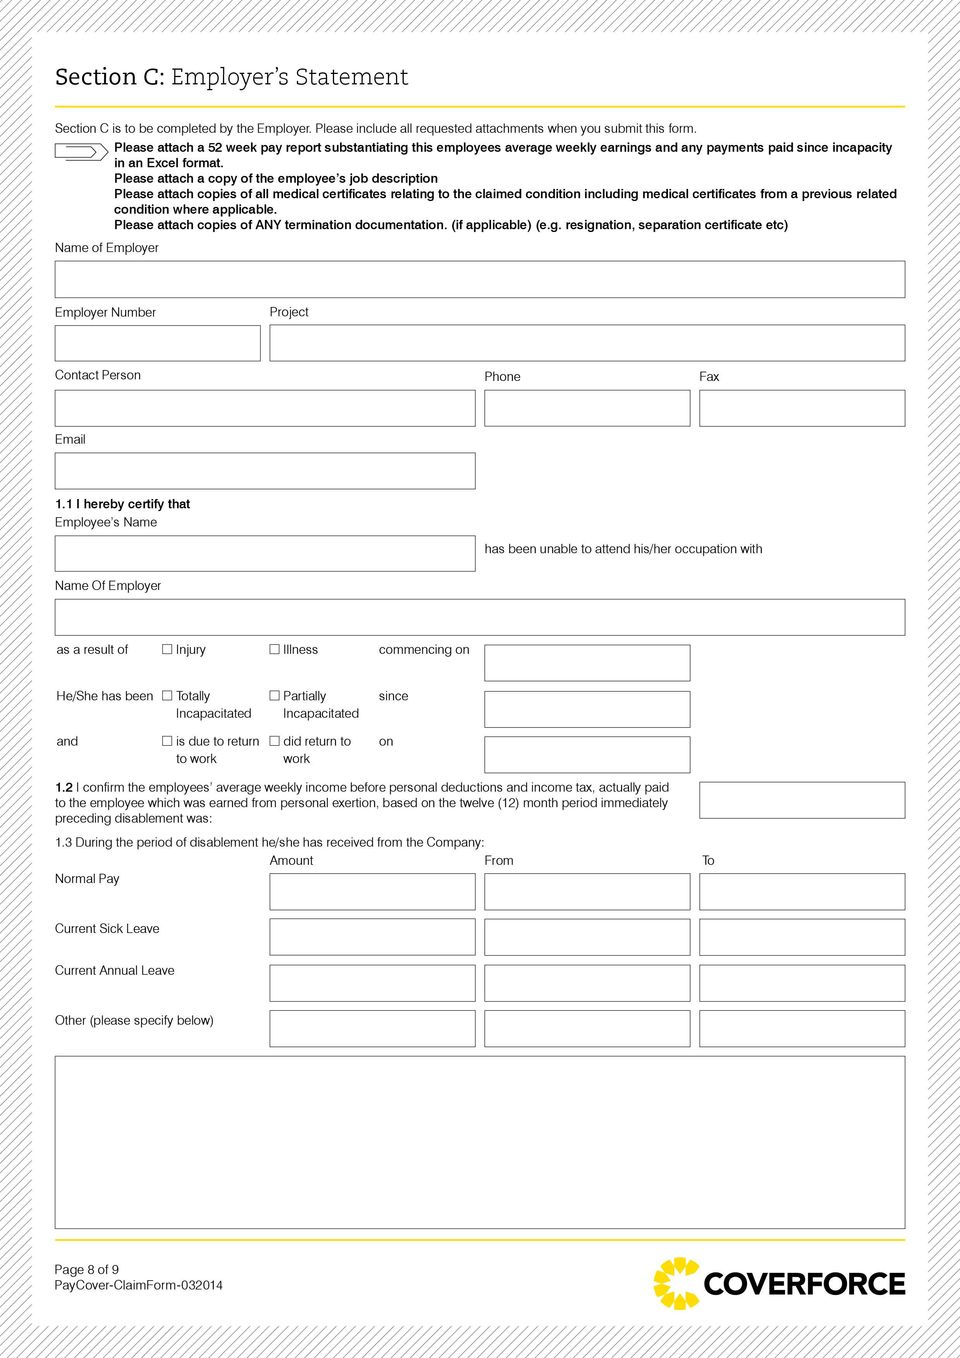 Please attach a copy of the employee s job description Please attach copies of all medical certificates relating to the claimed condition including medical certificates from a previous related